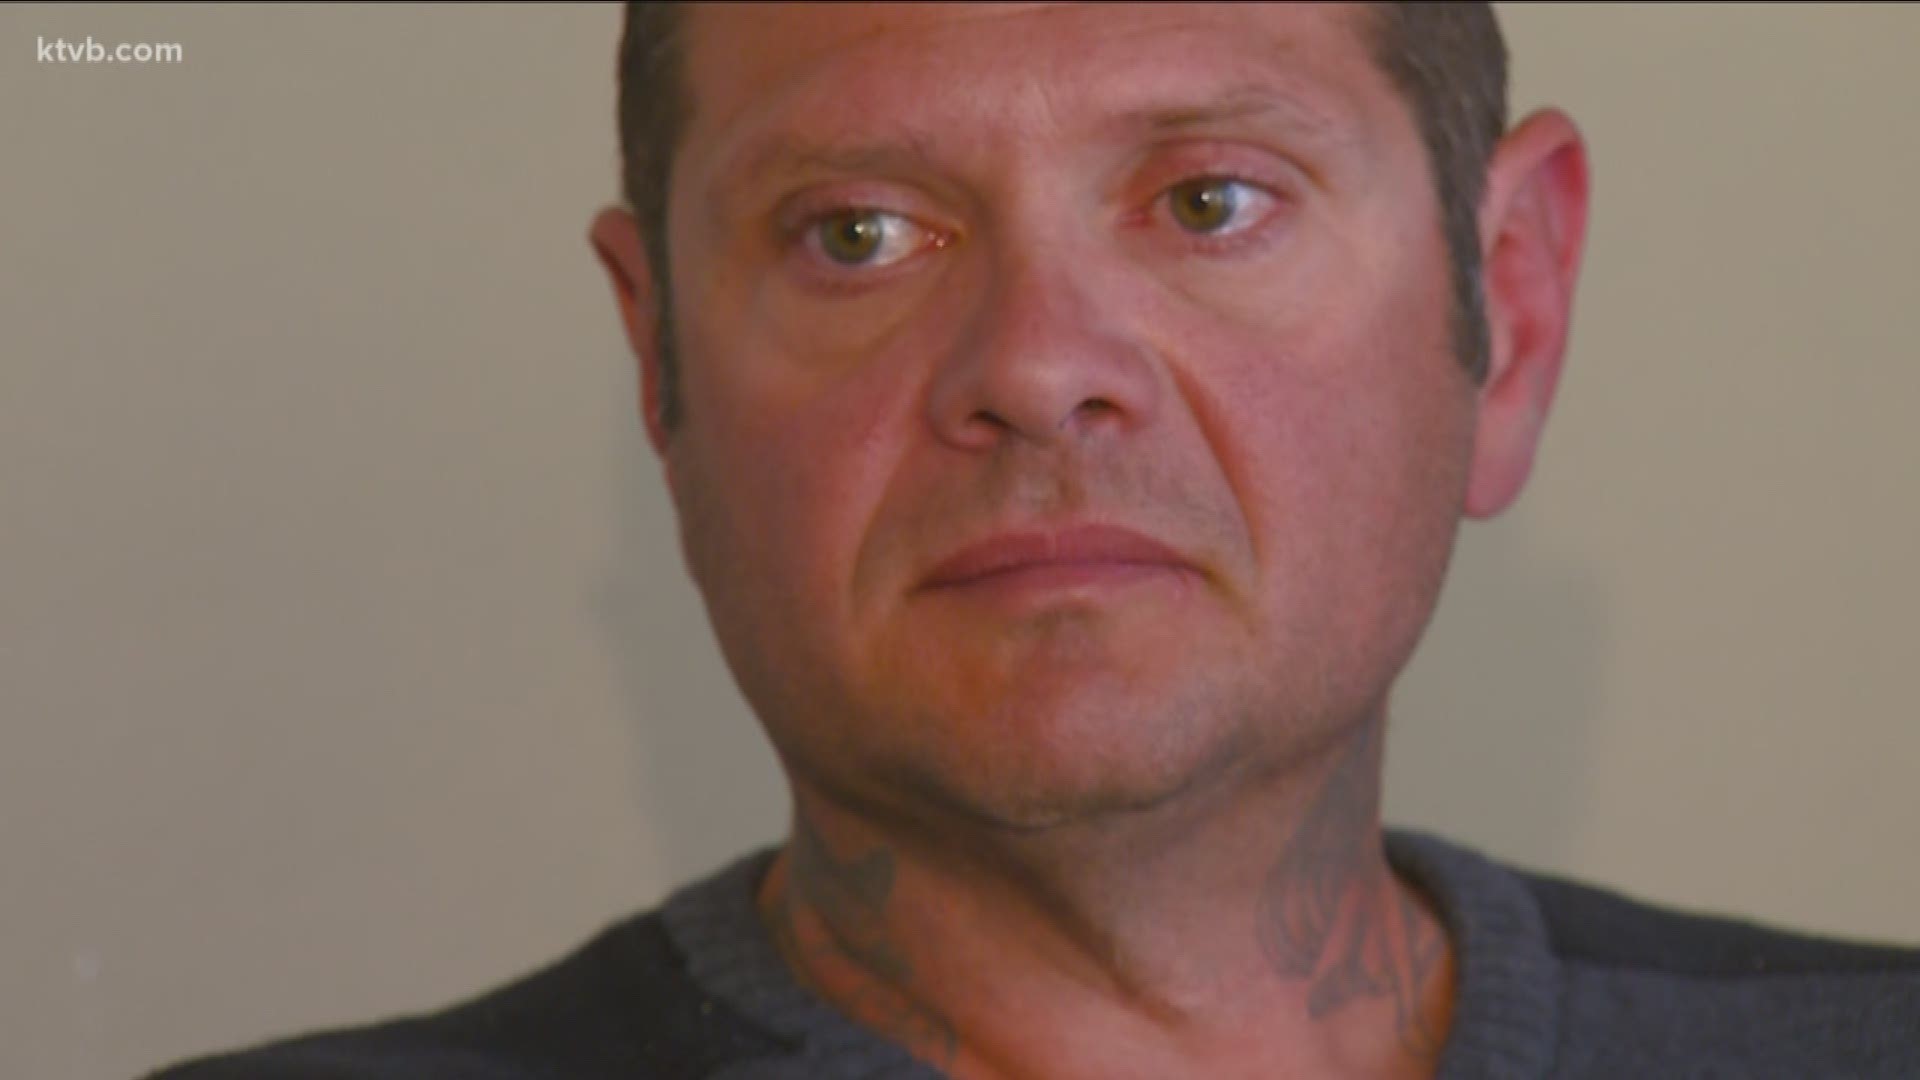 Recovering addicts open up about their deeply painful struggles, hoping to help others.